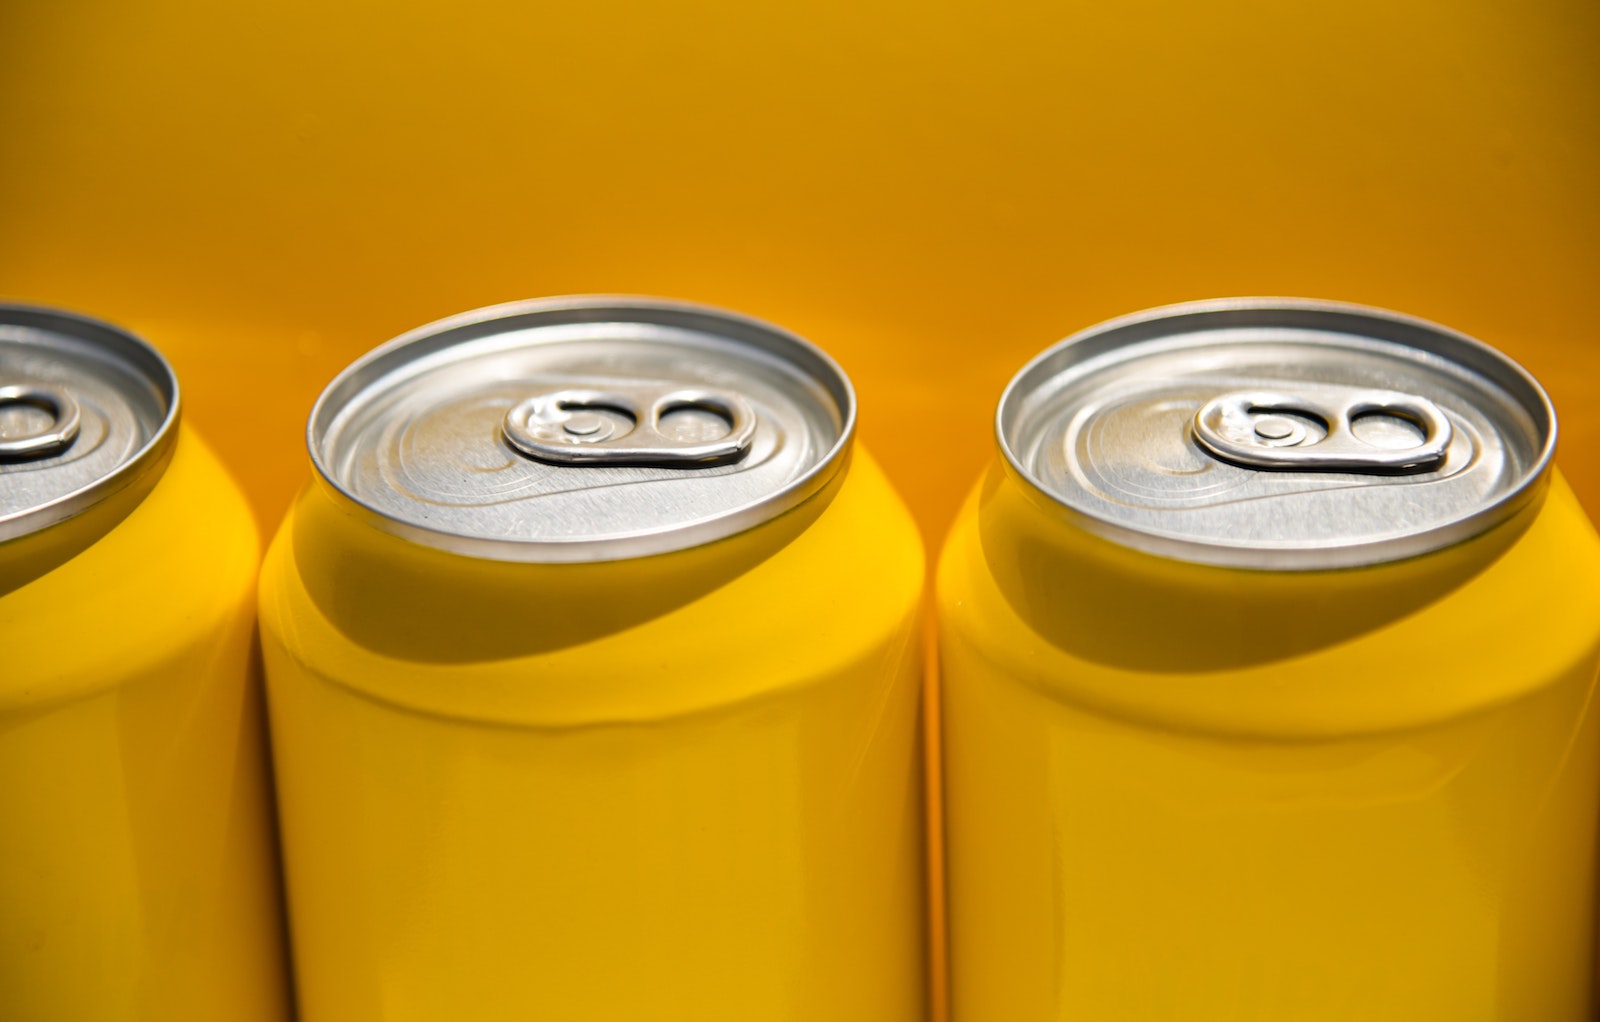 Beverage packaging combines aluminum and PET in one container